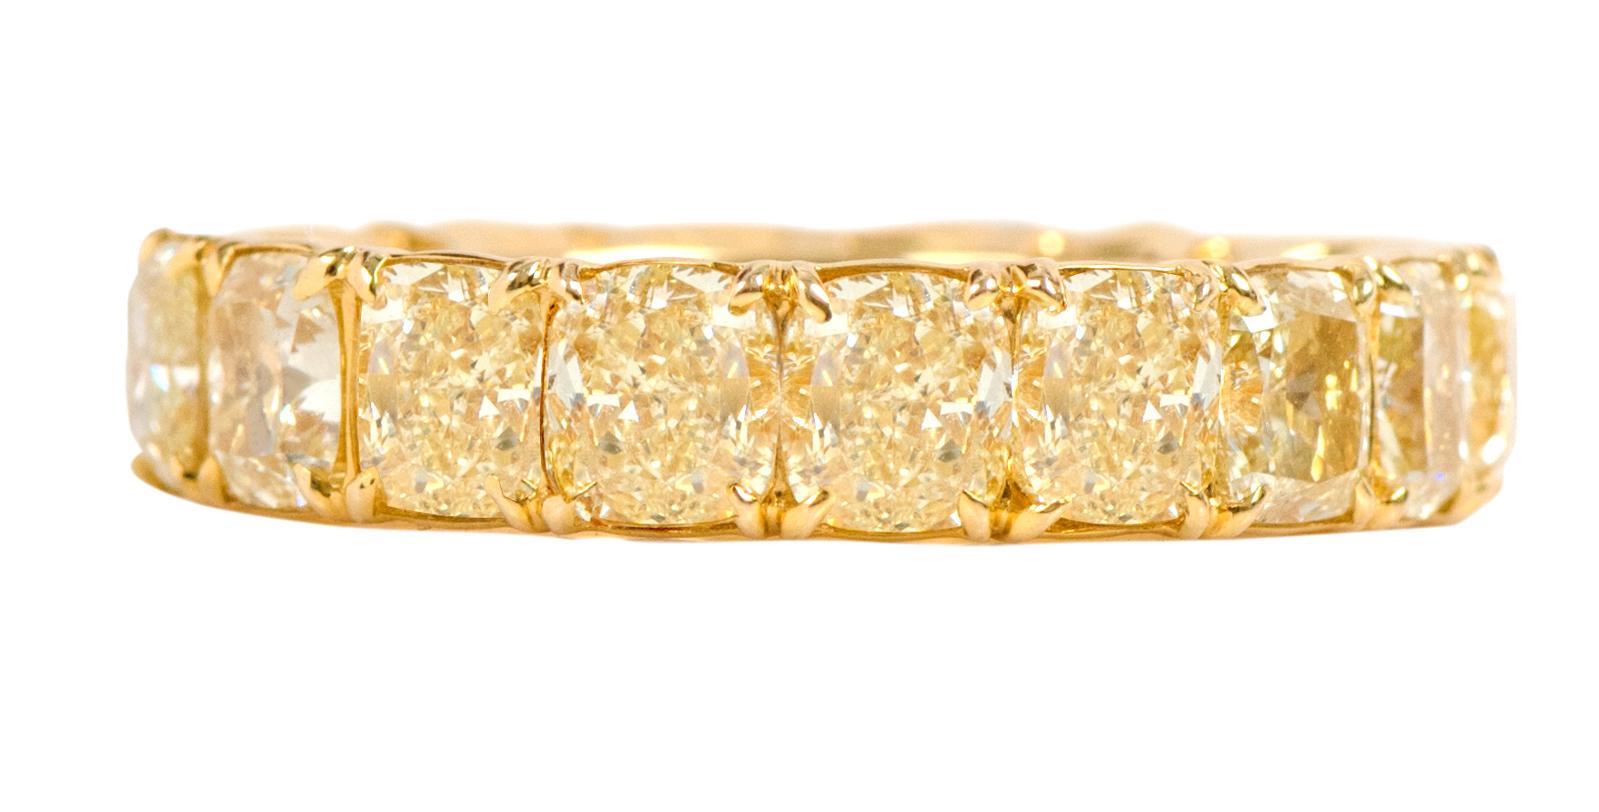 18 Karat Yellow Gold 10.01 Carat Solitaire Canary Yellow Diamond Eternity Band Ring

This magnanimous canary yellow diamond solitaire band is marvelous. The eternity intense yellow cushion cut diamond band is elegantly set with a continuous line of